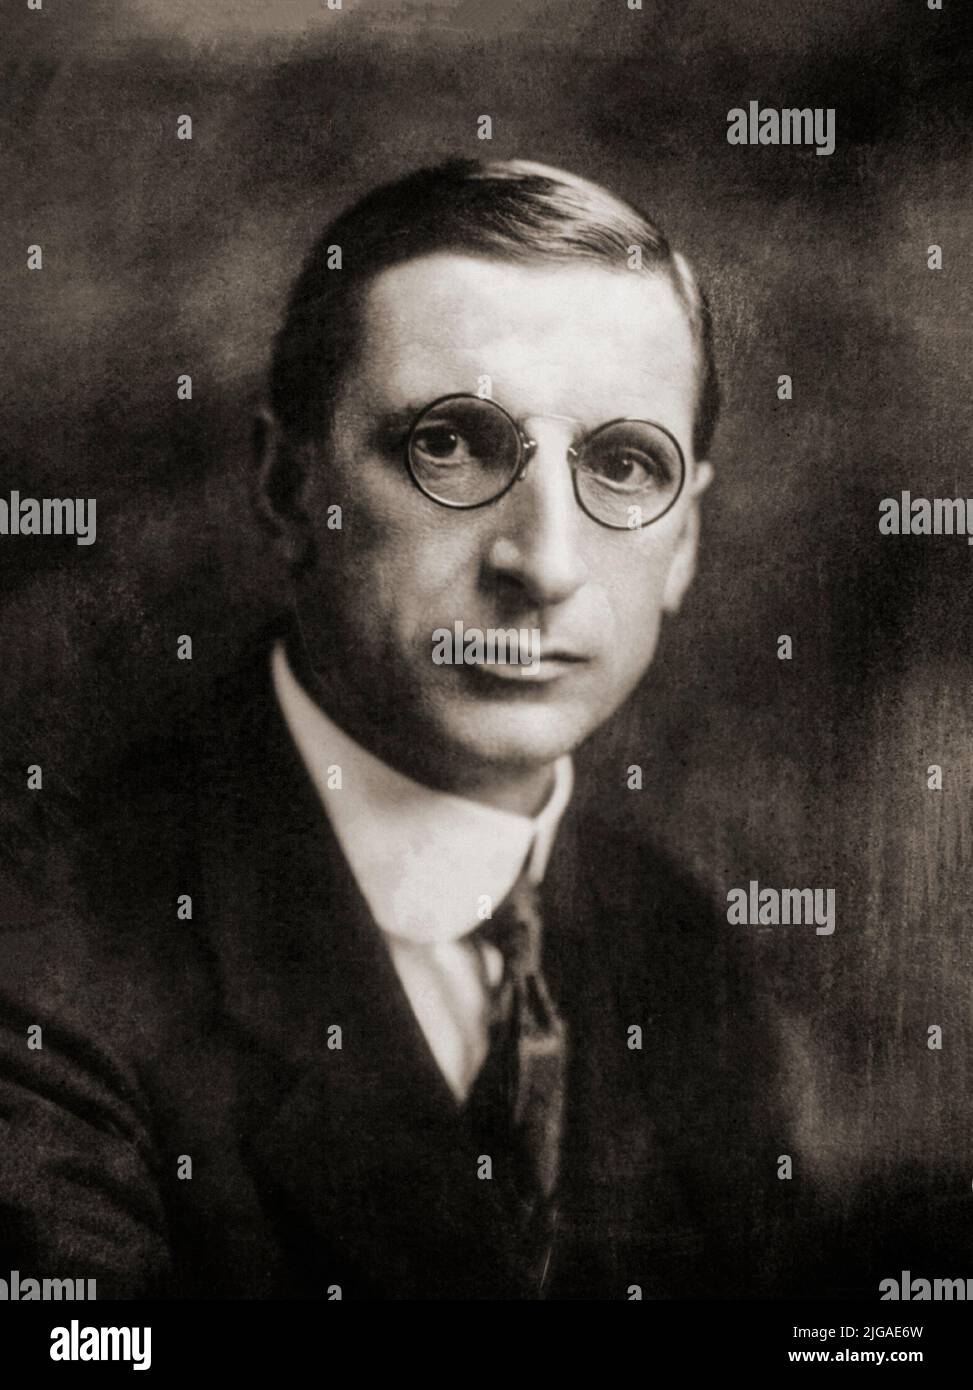 A portrait of Éamon de Valera (1882-1975), a commandant at Boland's Mill during the 1916 Easter Rising, he was arrested and sentenced to death but released for a variety of reasons, including the public response to the British execution of Rising leaders. He returned to Ireland after being jailed in England and became one of the leading political figures of the War of Independence. Later he became a prominent statesman and political leader serving several terms as head of government and head of state. He had a leading role in introducing the 1937 Constitution of Ireland. Stock Photo